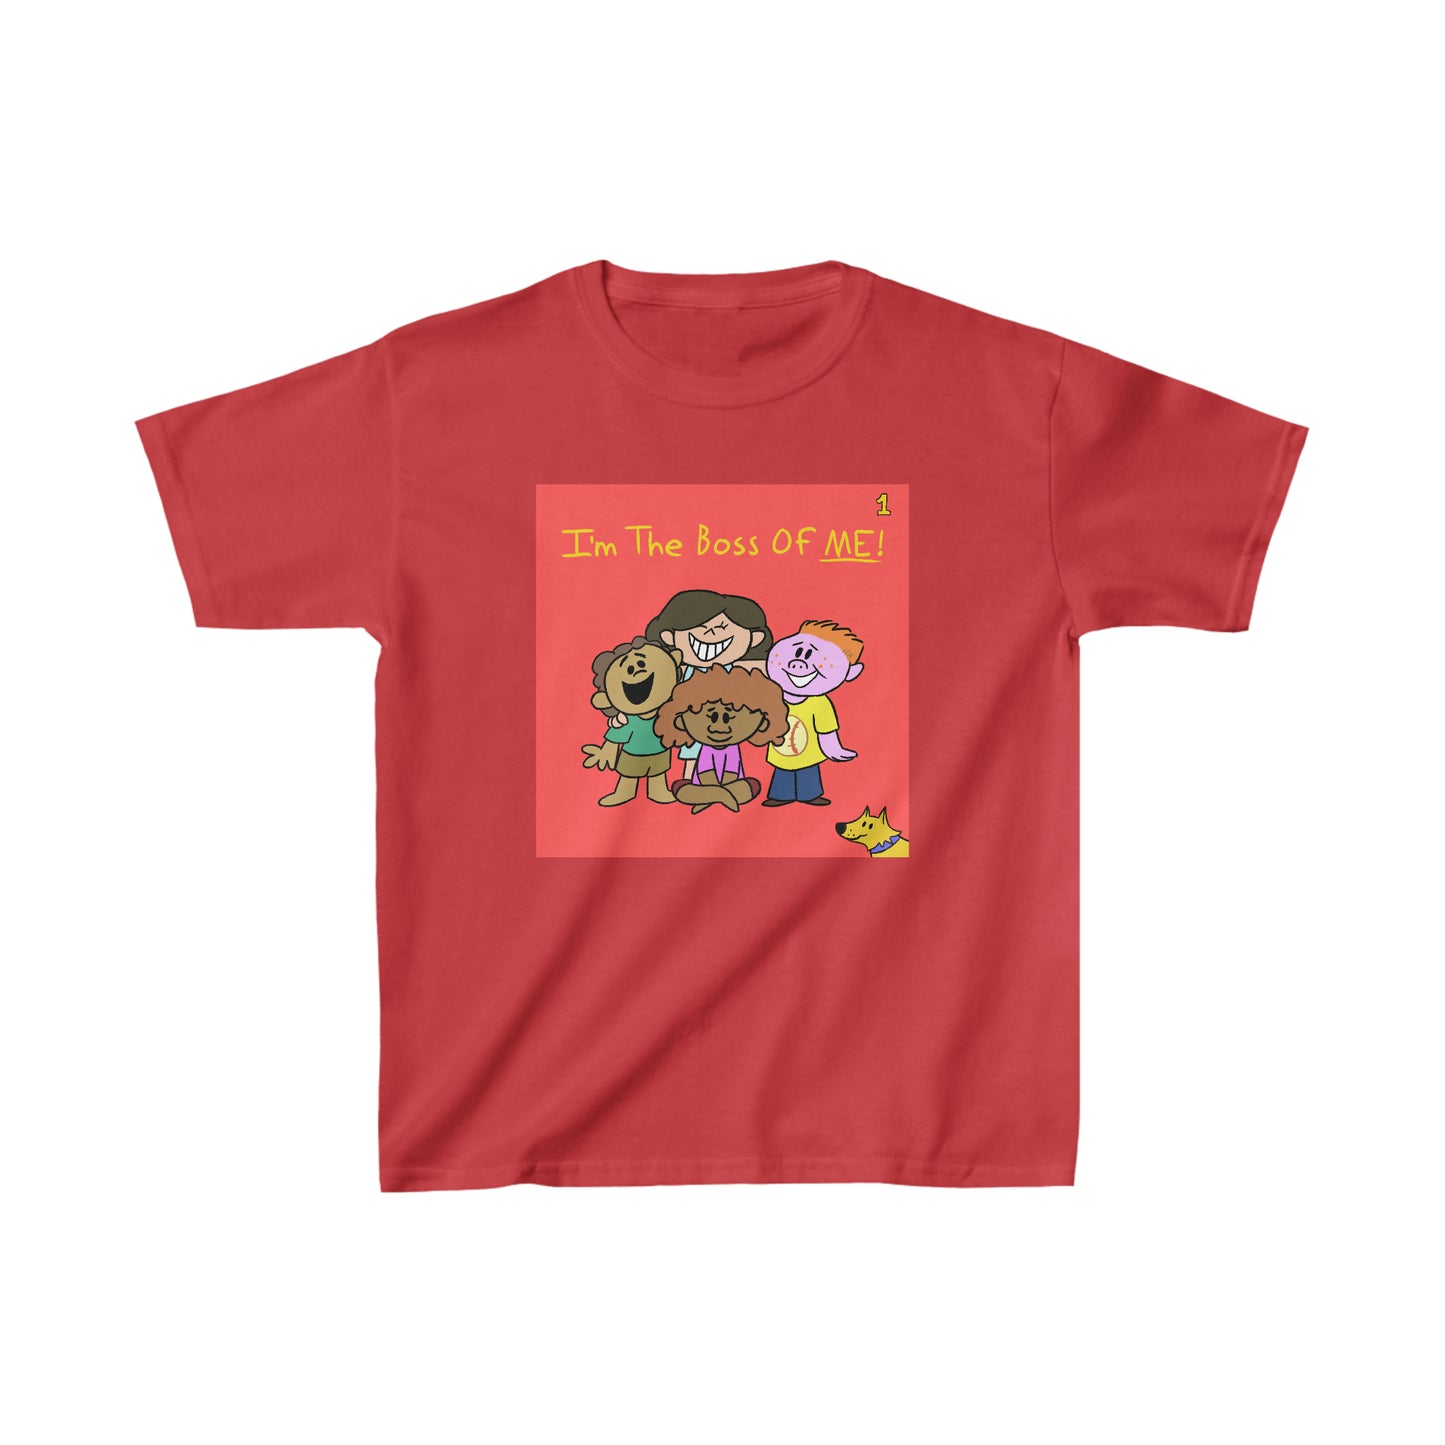 ITBOM Kids - Dog Boss Big Kids Regular Fit Heavy Cotton Short Sleeve Tee XS-XL in 7 different Boss-Some colors